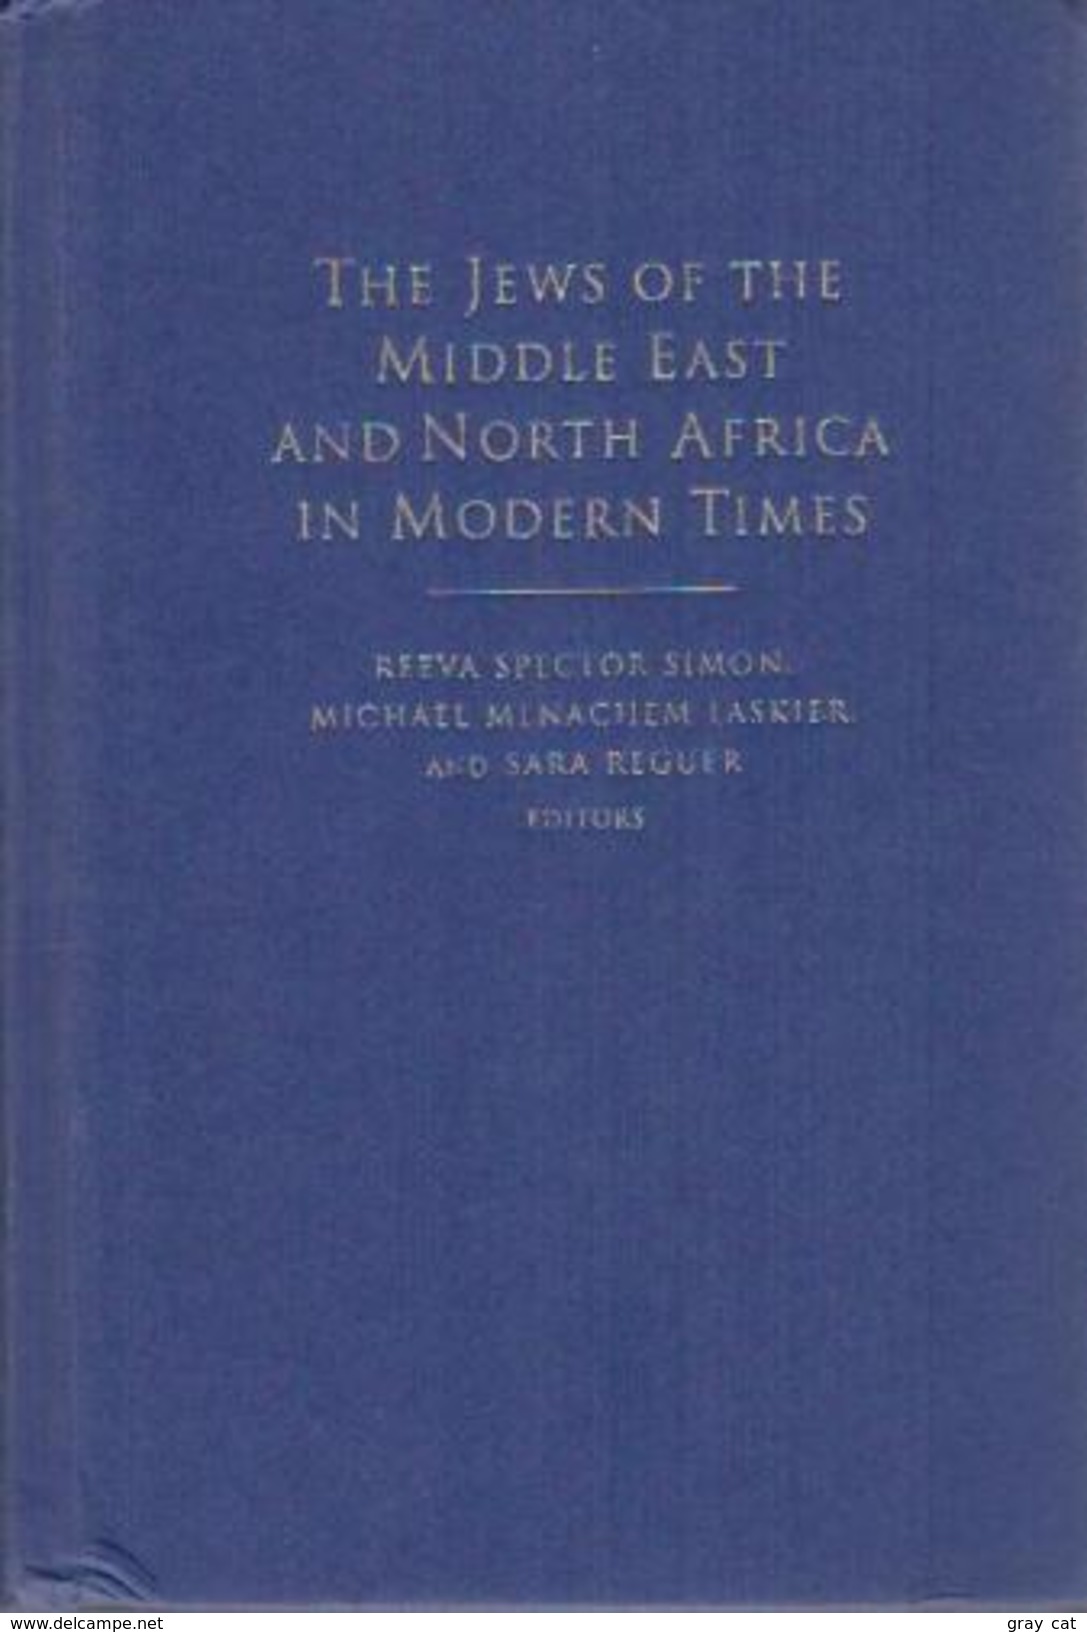 The Jews Of The Middle East And North Africa In Modern Times By Michael Menachem Laskier (ISBN 9780231107969) - Moyen Orient